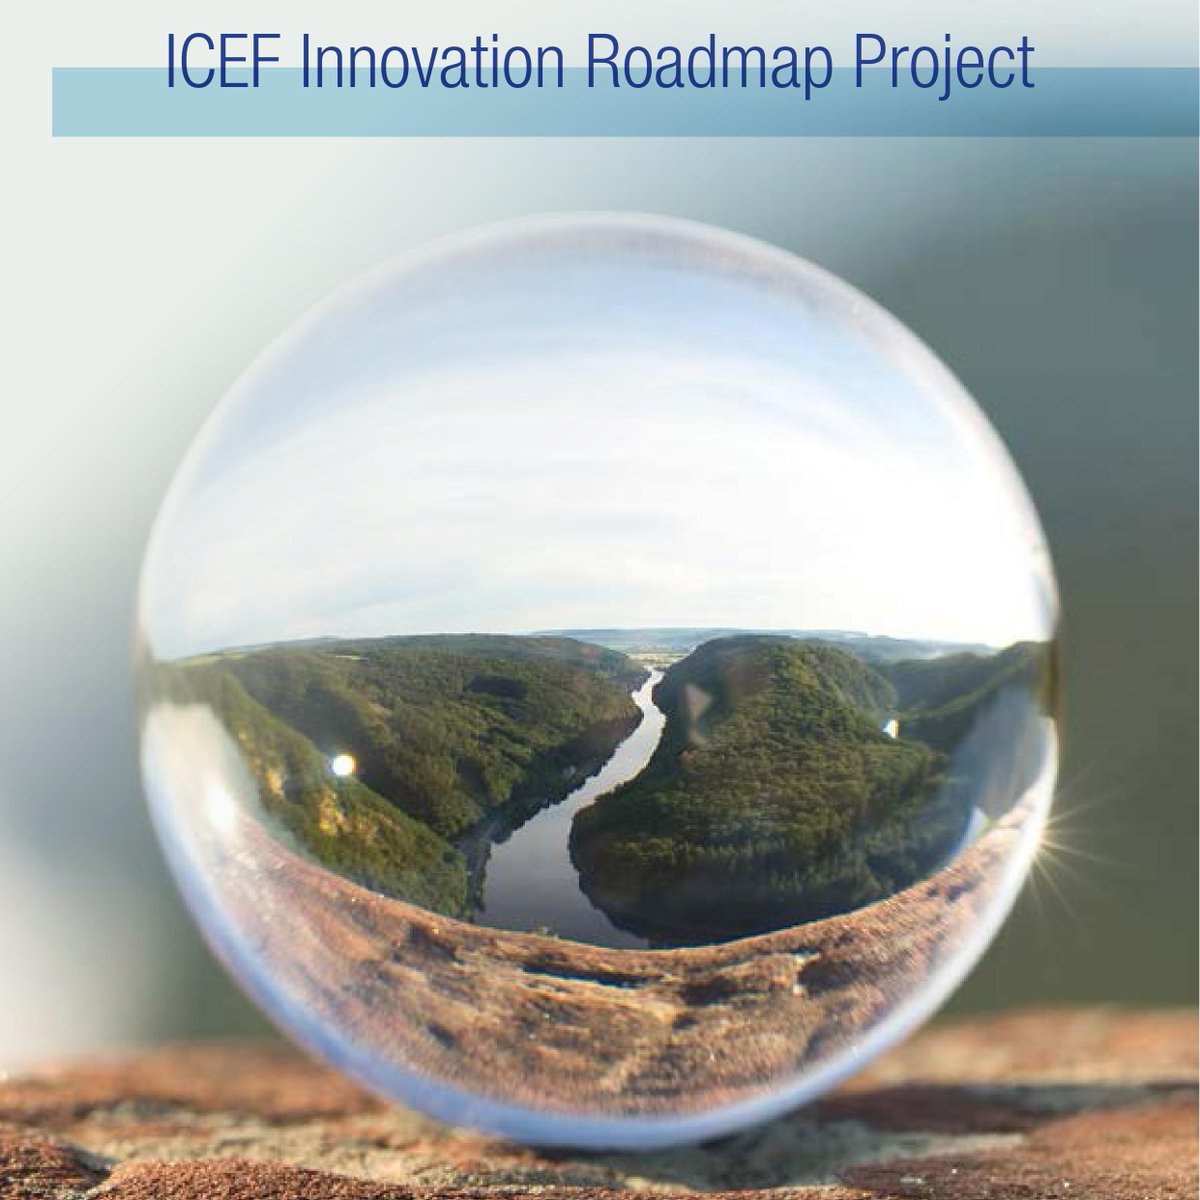 ICEF Innovation Roadmap Project chaired by @columbiaclimate's @dsandalow has released its 10th clean energy roadmap, providing '...important research on a wide range of technologies for helping achieve net zero emissions,' says @IPCC_CH chair Hoesung Lee. icef.go.jp/pdf/summary/ro…